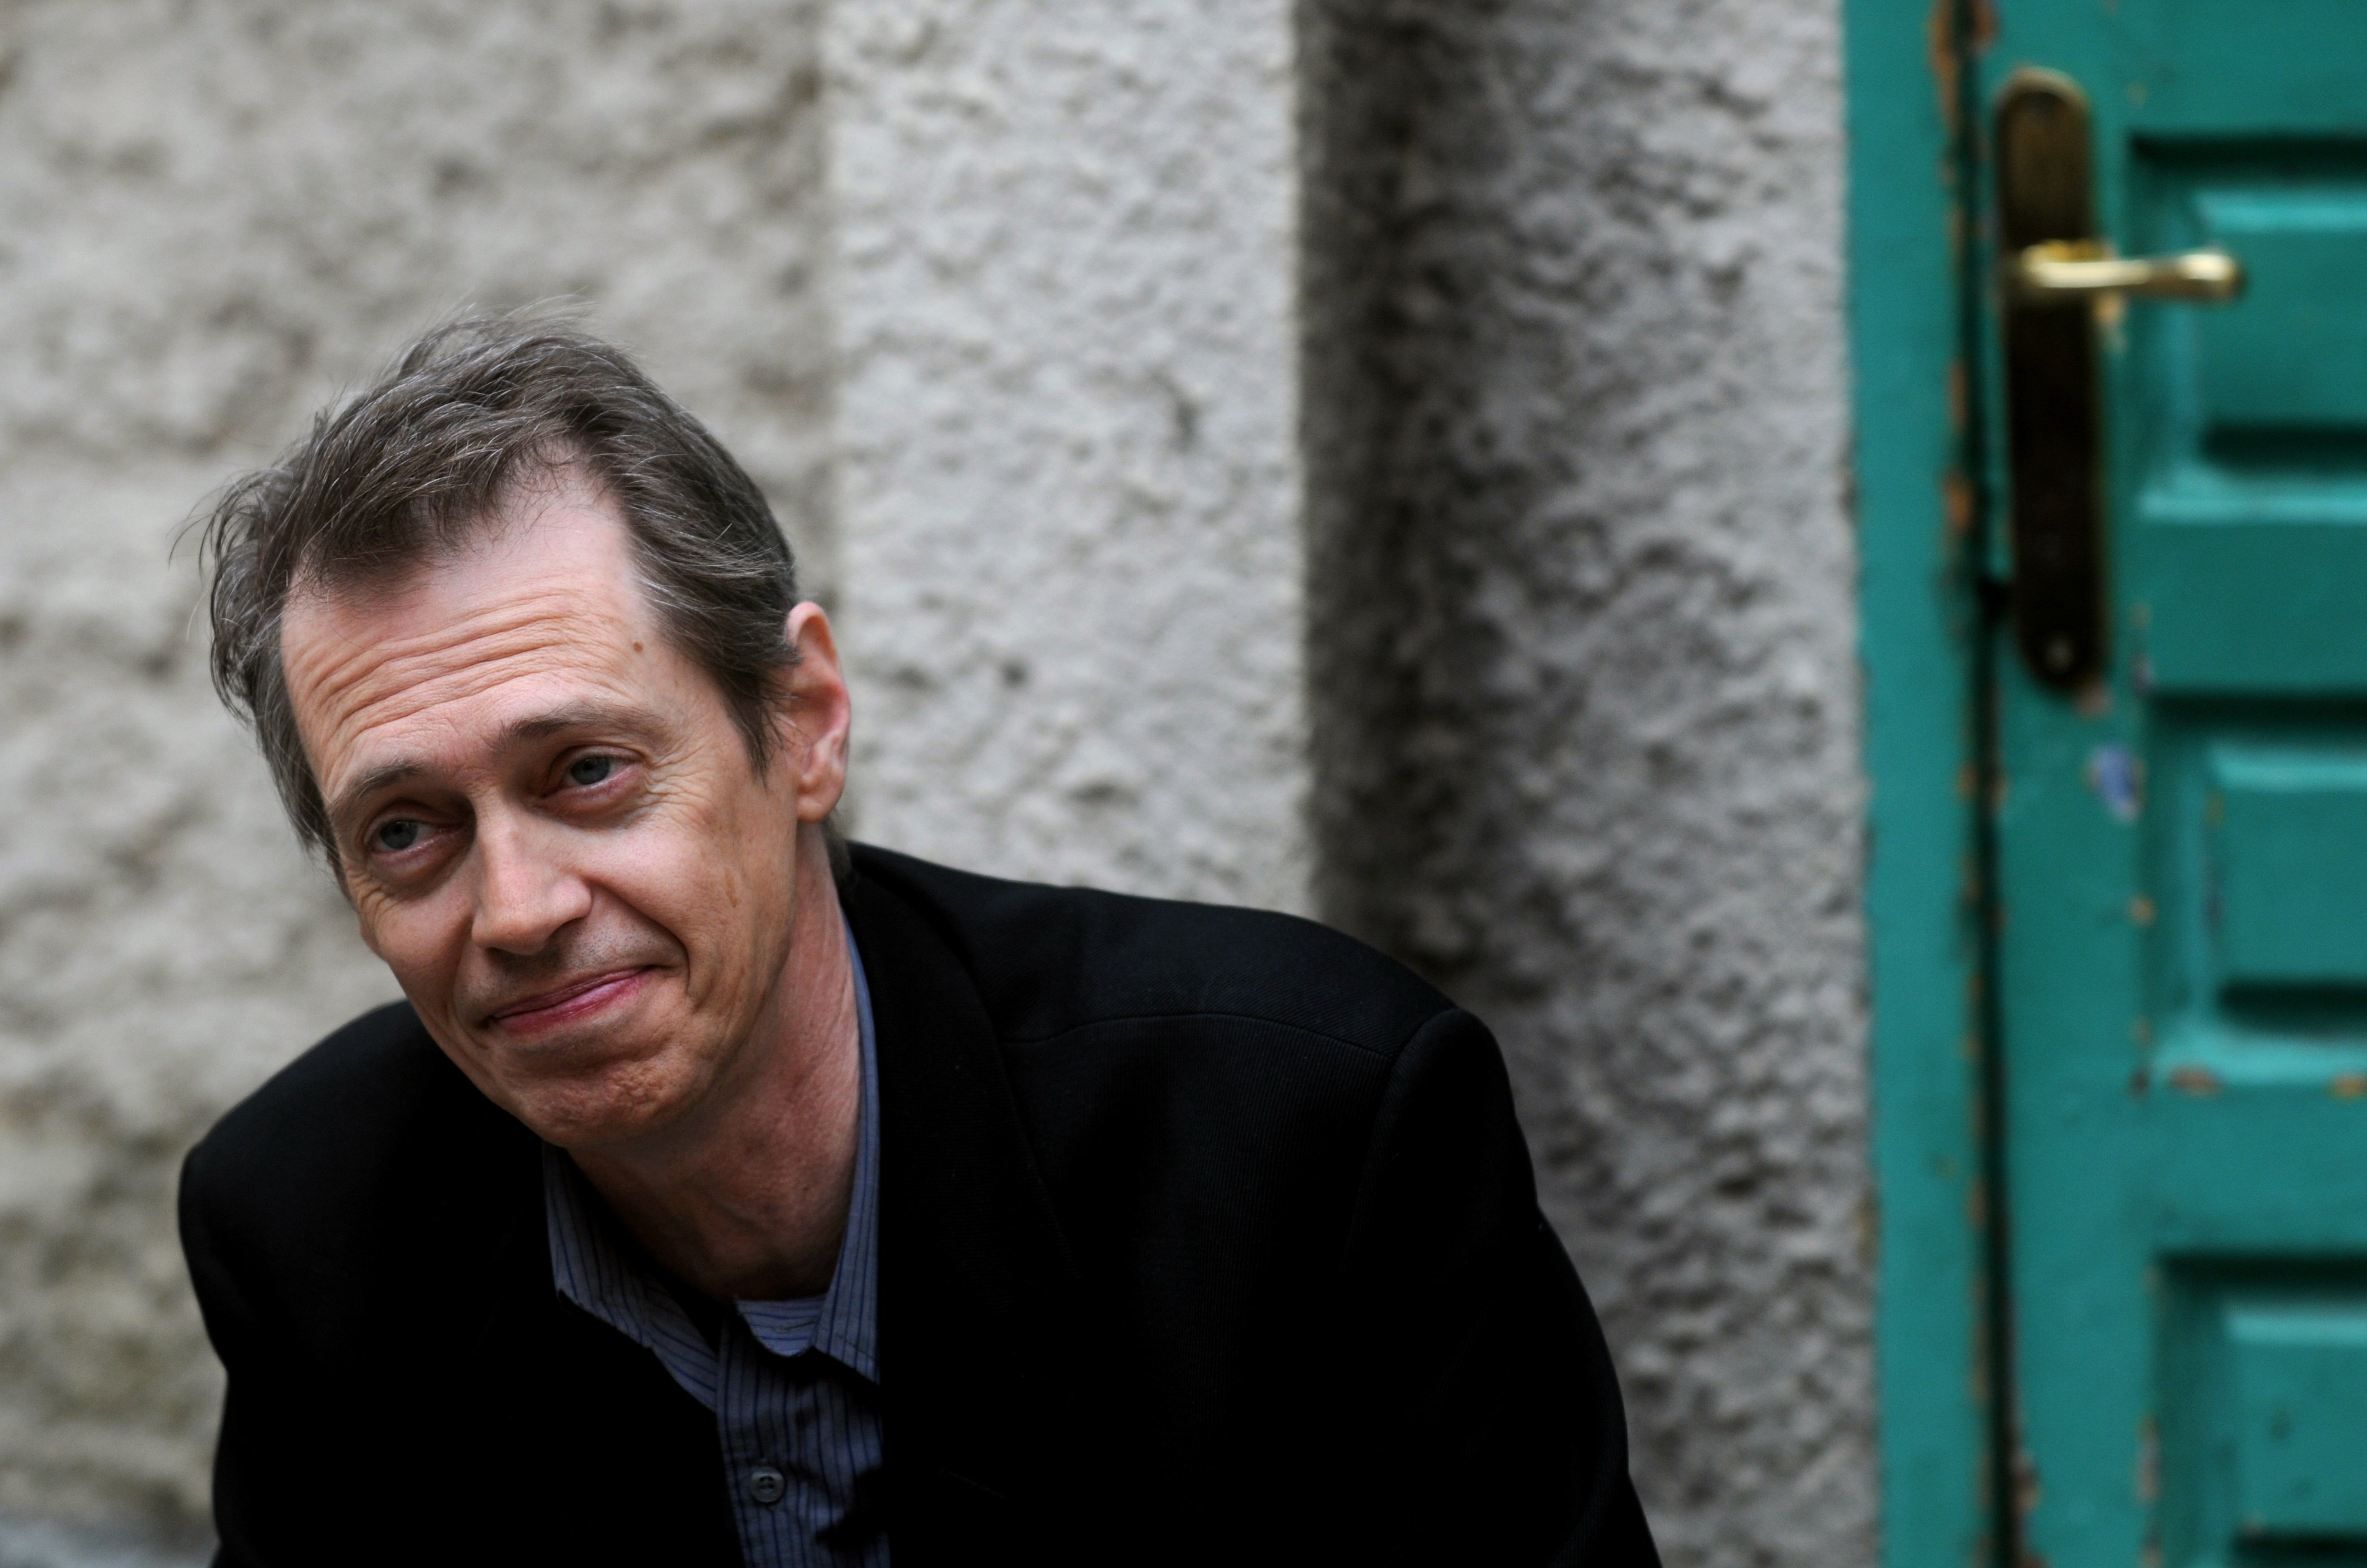 Steve Buscemi in Rome, Italy to present his new film 'Interview' in Rome, Italy on March 27, 2008 | Photo: GettyImages